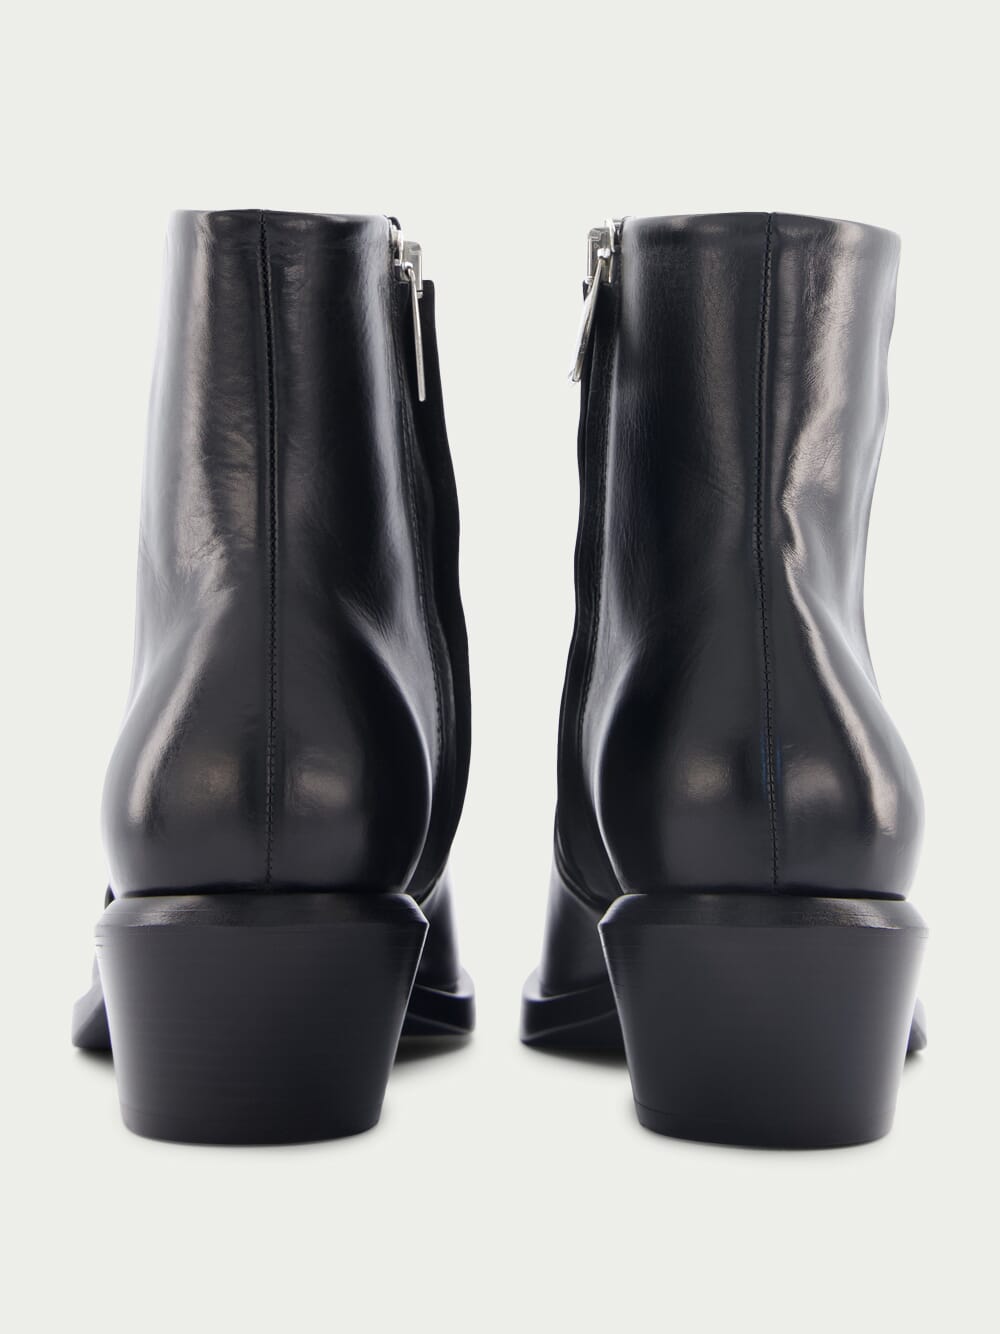 Off-WhiteSlim Texan Ankle leather boot at Fashion Clinic